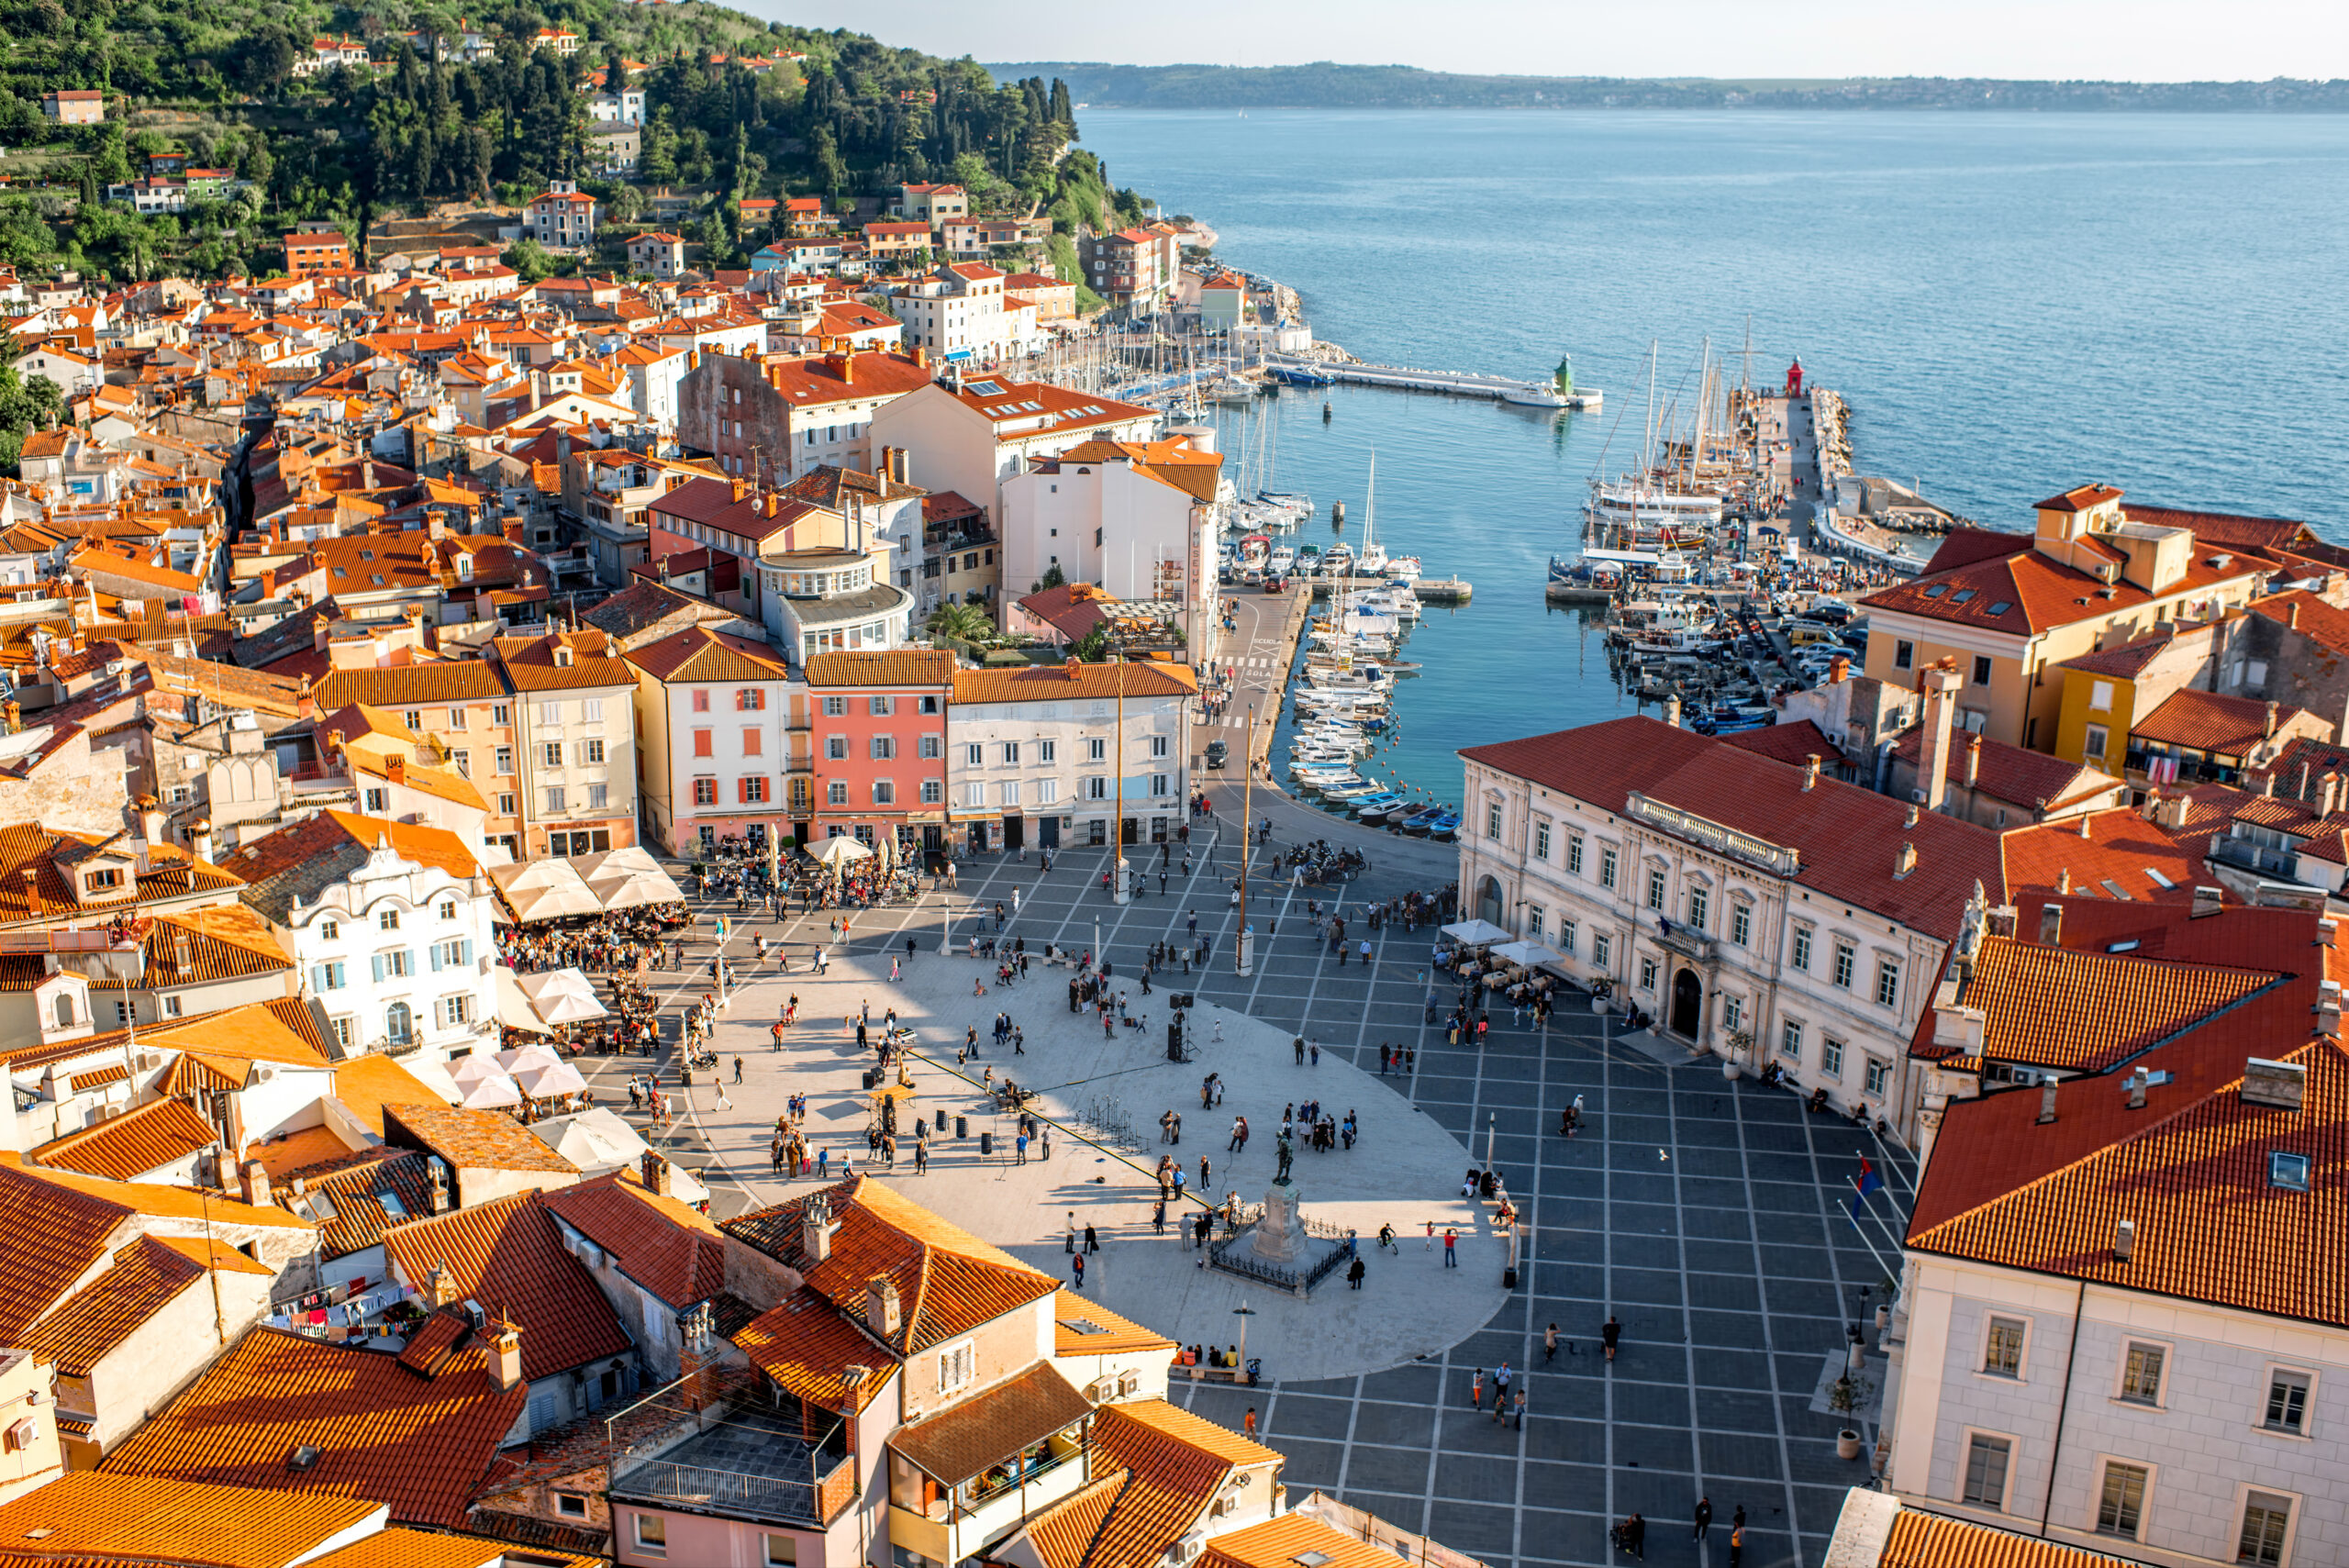 Beautiful aerial view on town with main square, ancient buildings with red roofs and Adriatic sea